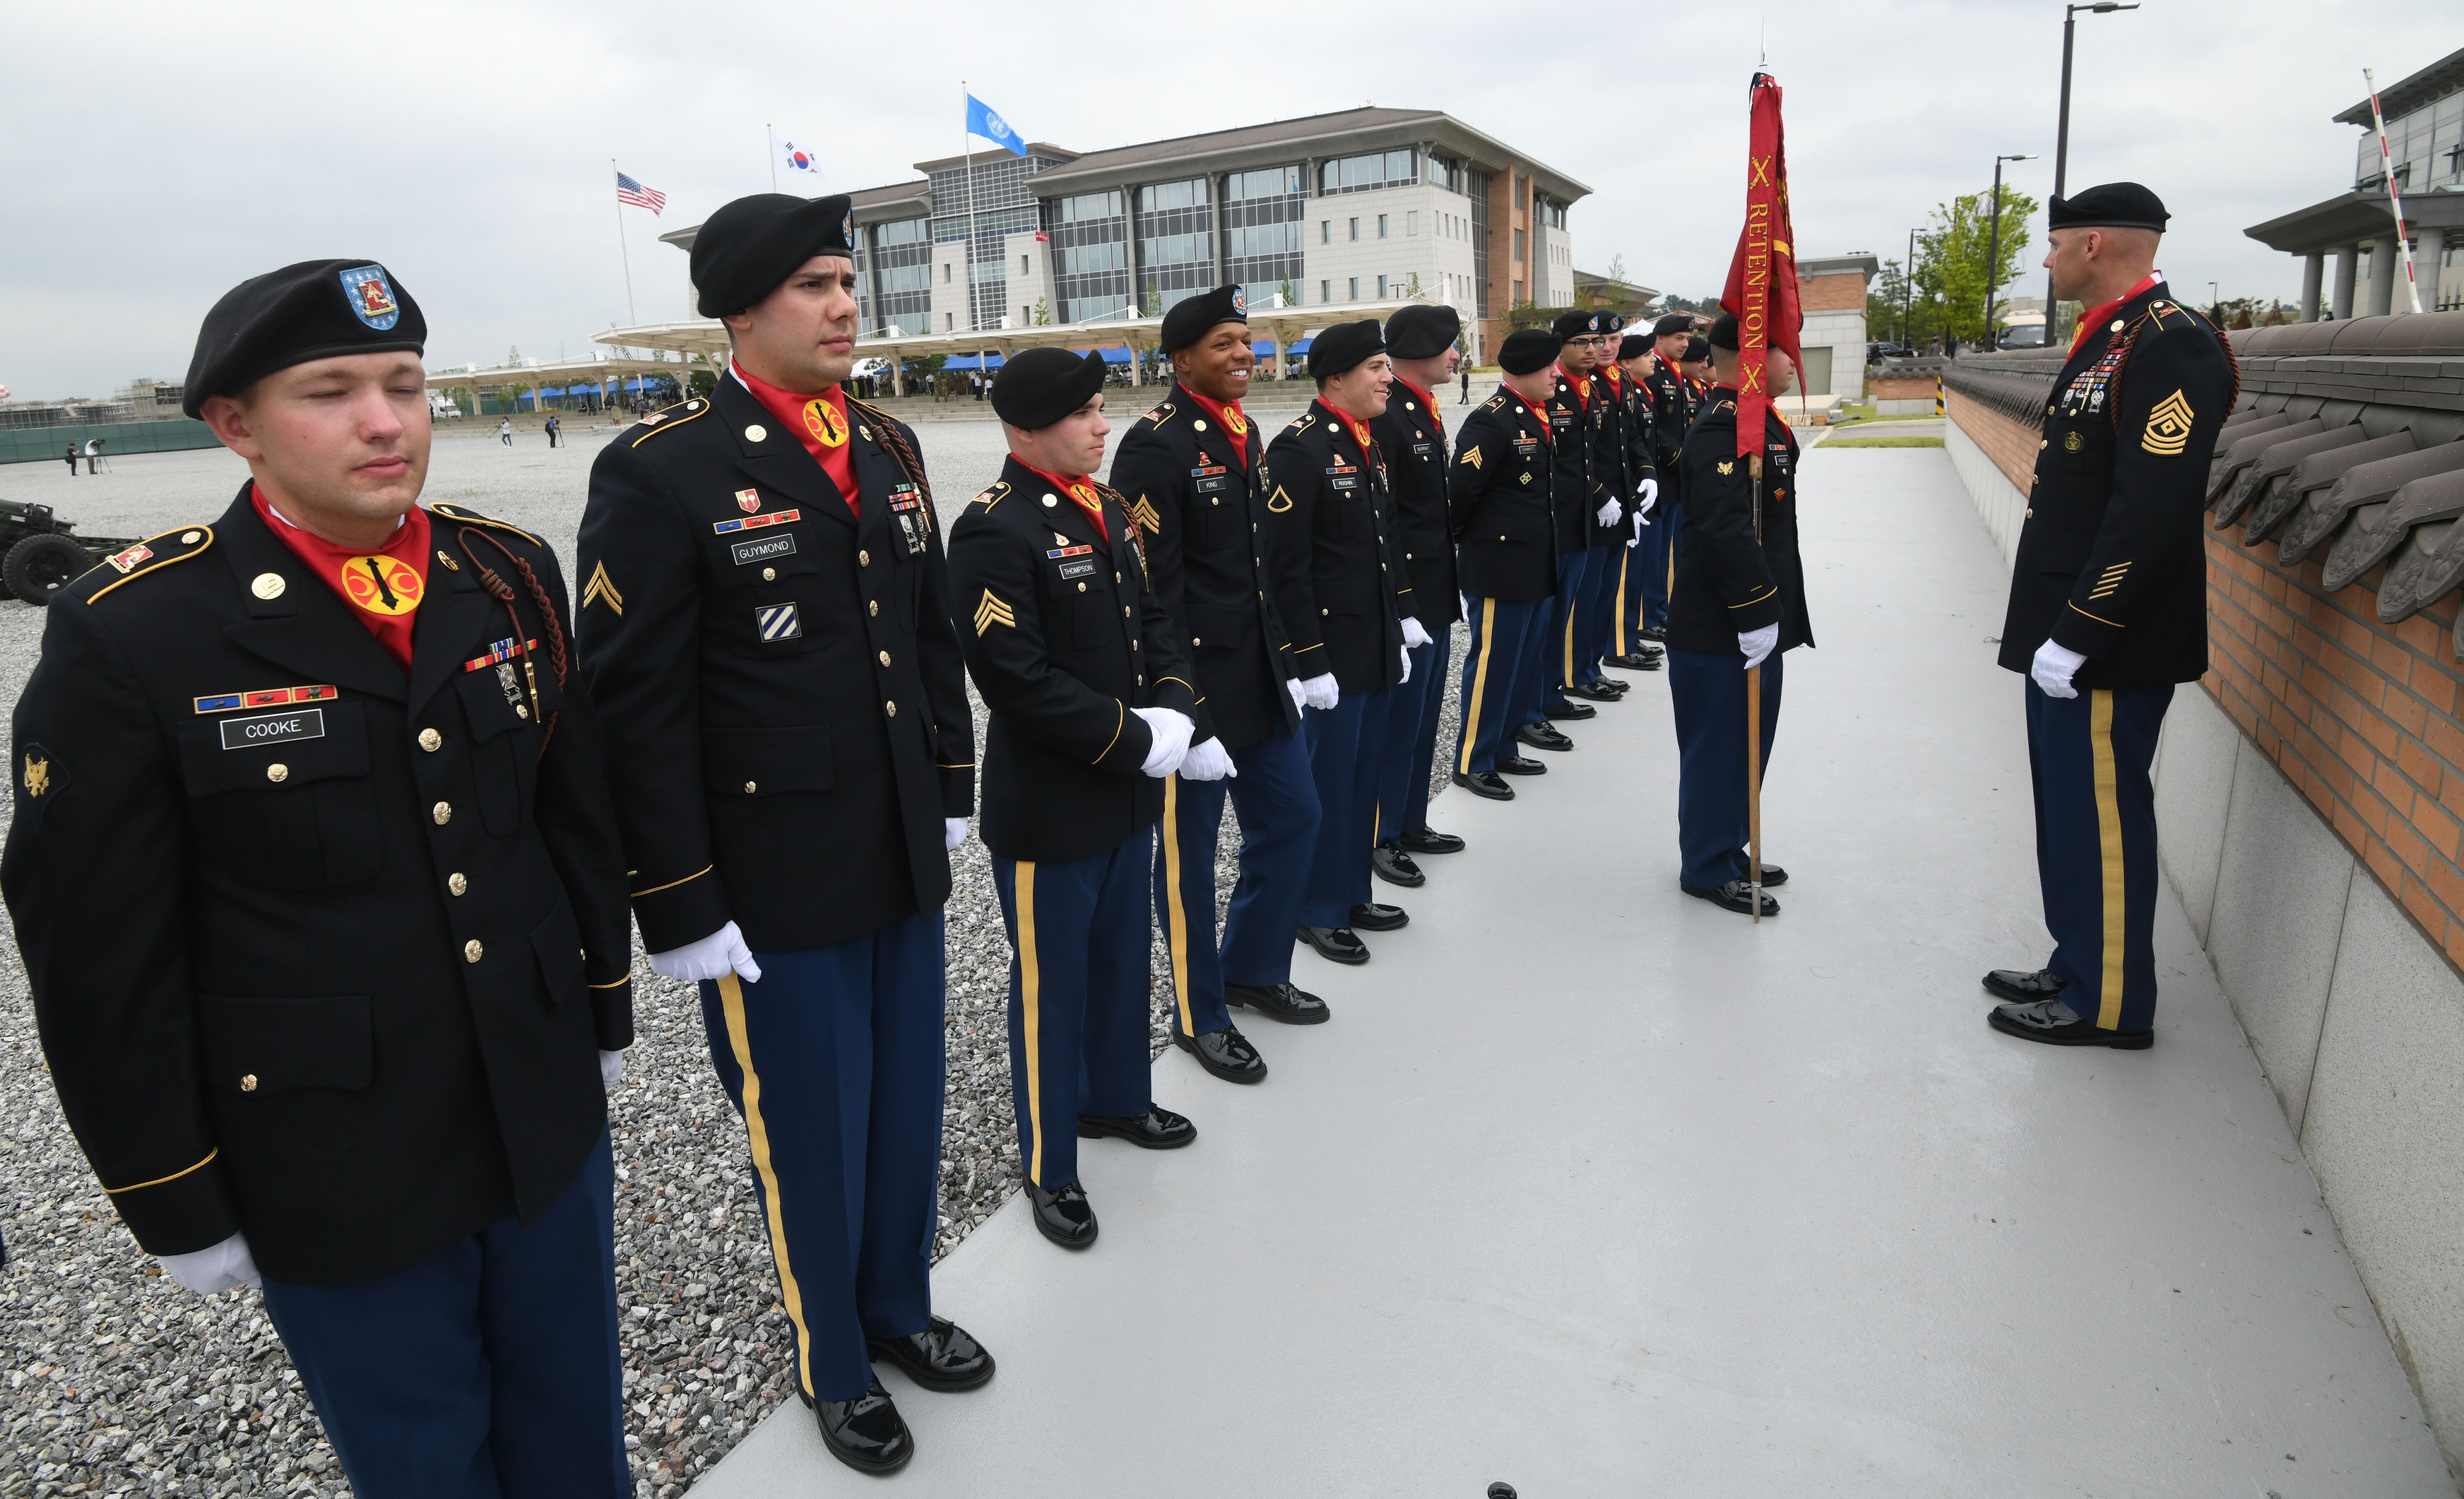 US soldiers stand ahead of a grand opening ceremony of the new headquarters building for the United Nations Command and US Forces Korea at Camp Humphreys in Pyeongtaek on June 29, 2018. (JUNG YEON-JE—AFP/Getty Images)